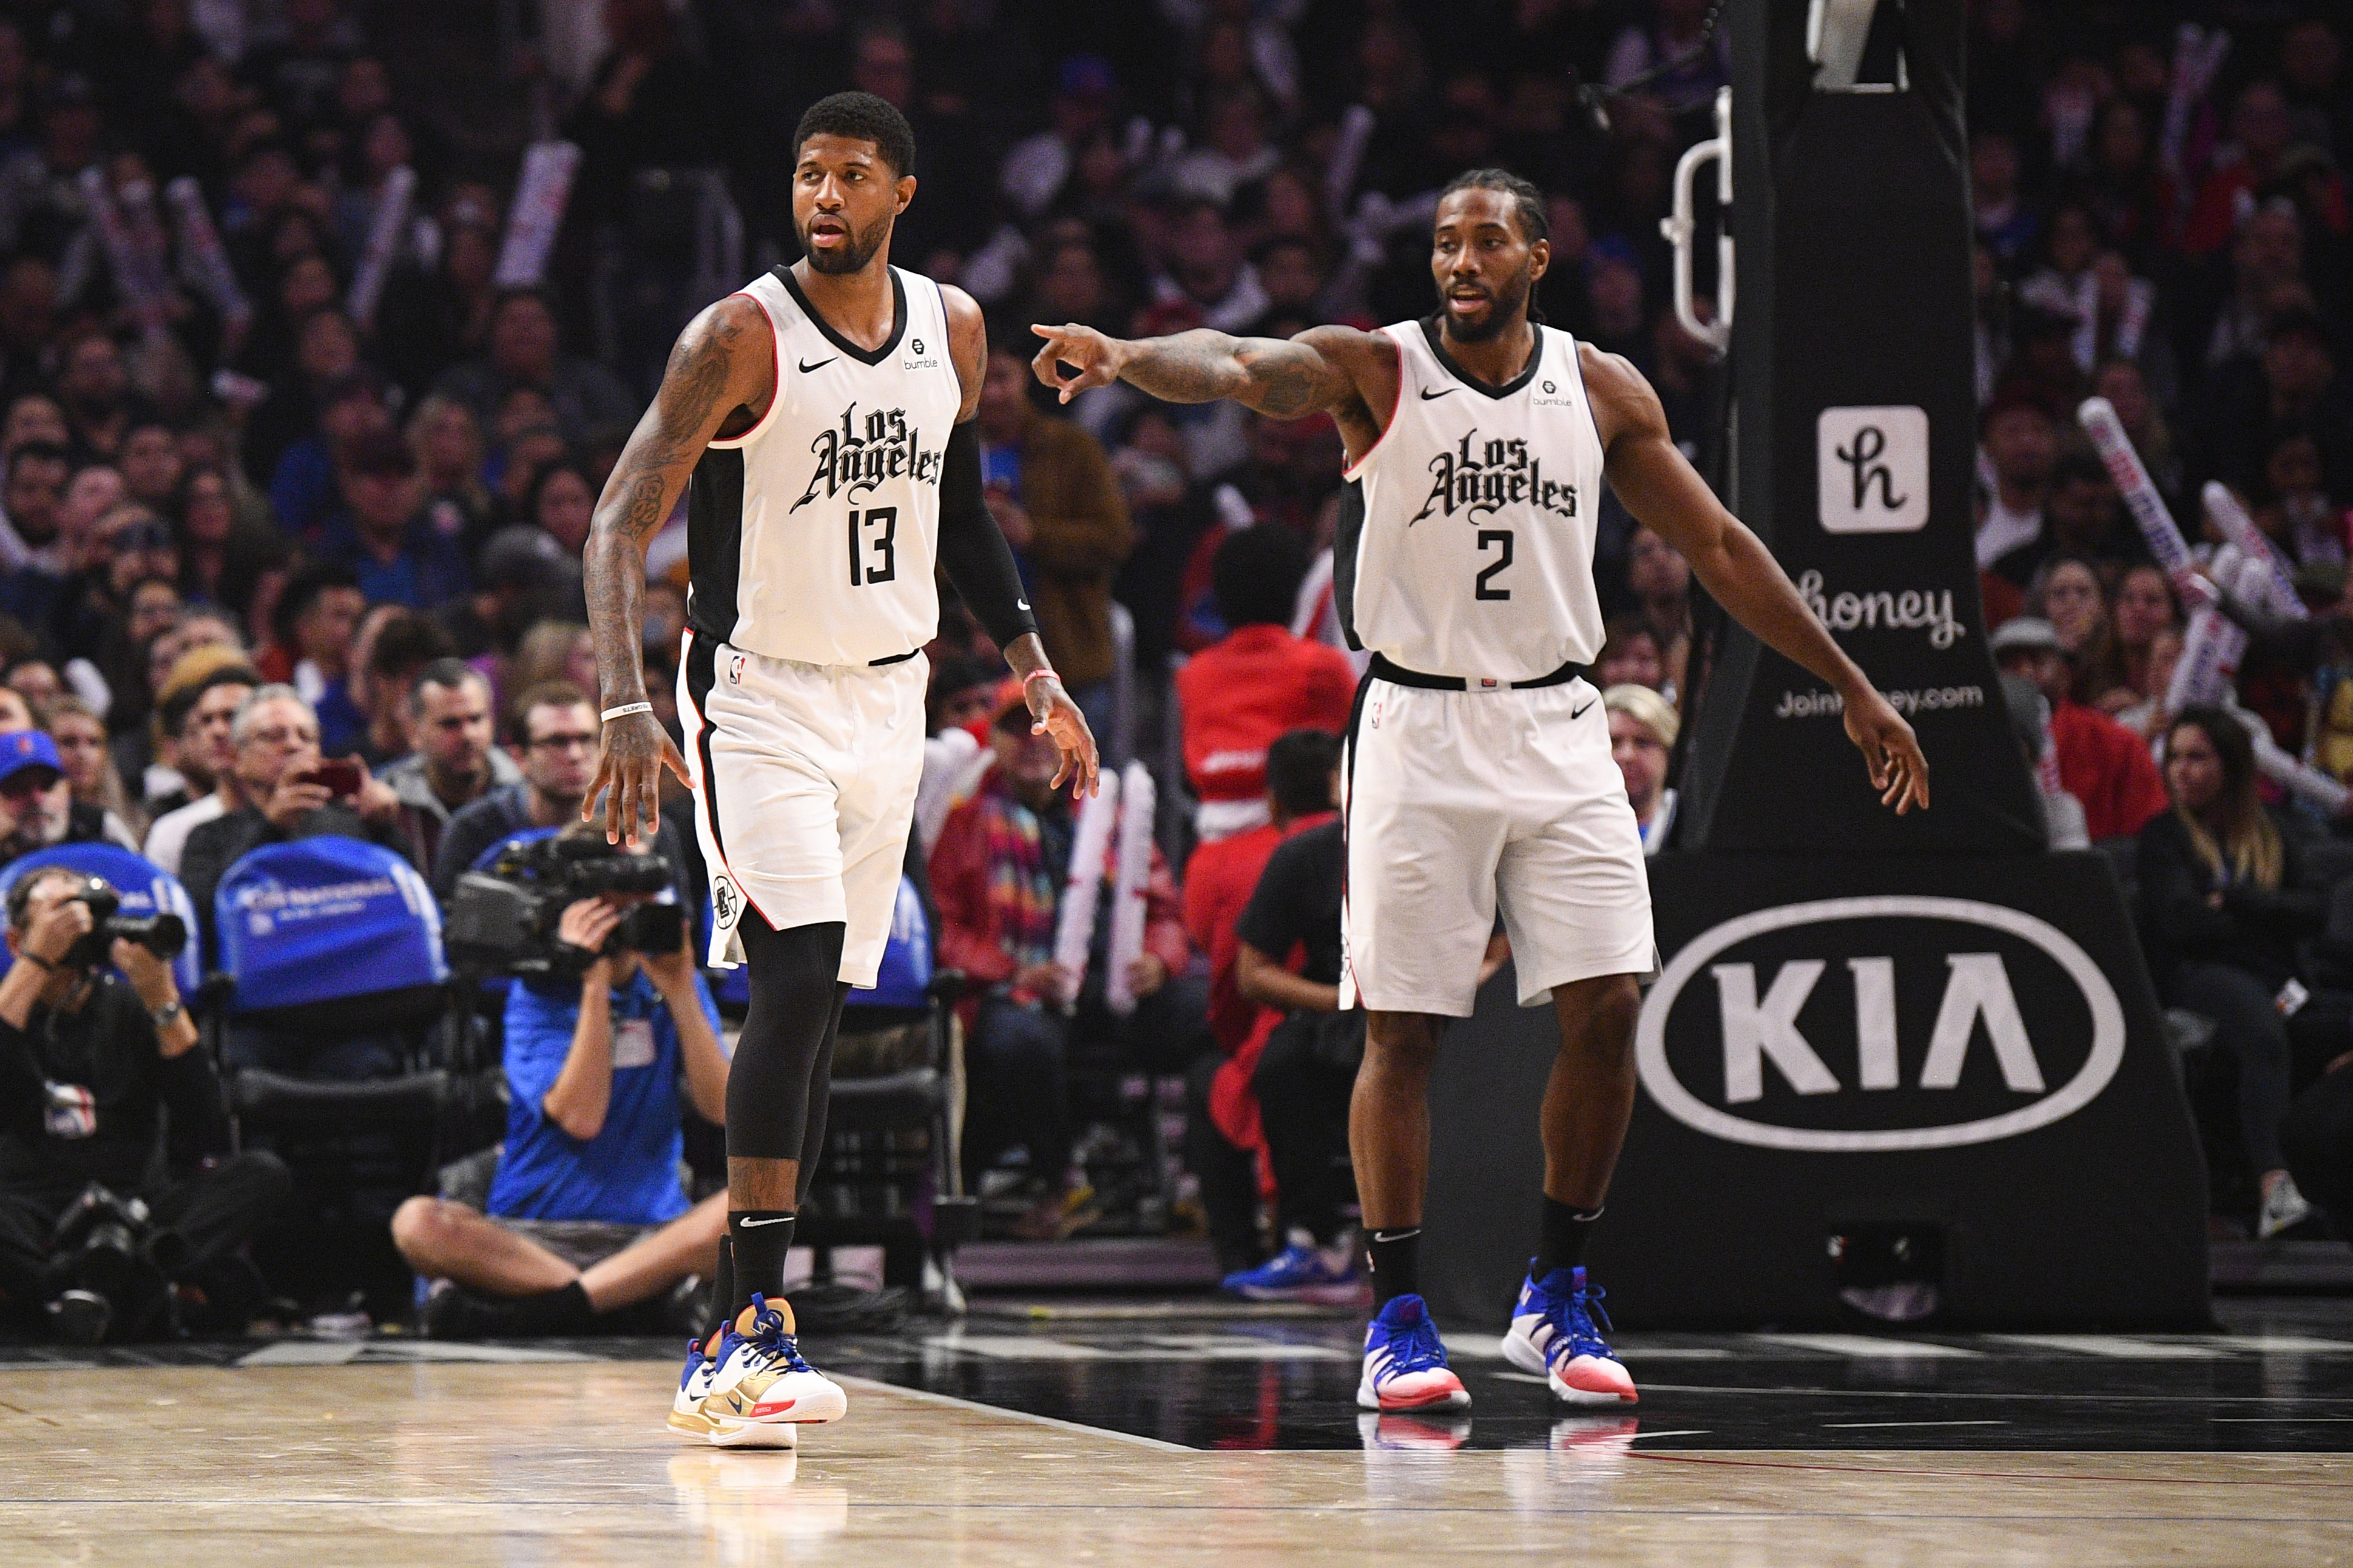 Kawhi Leonard and Paul George may have torpedoed the LA Clippers with some behind-the-scenes behavior.